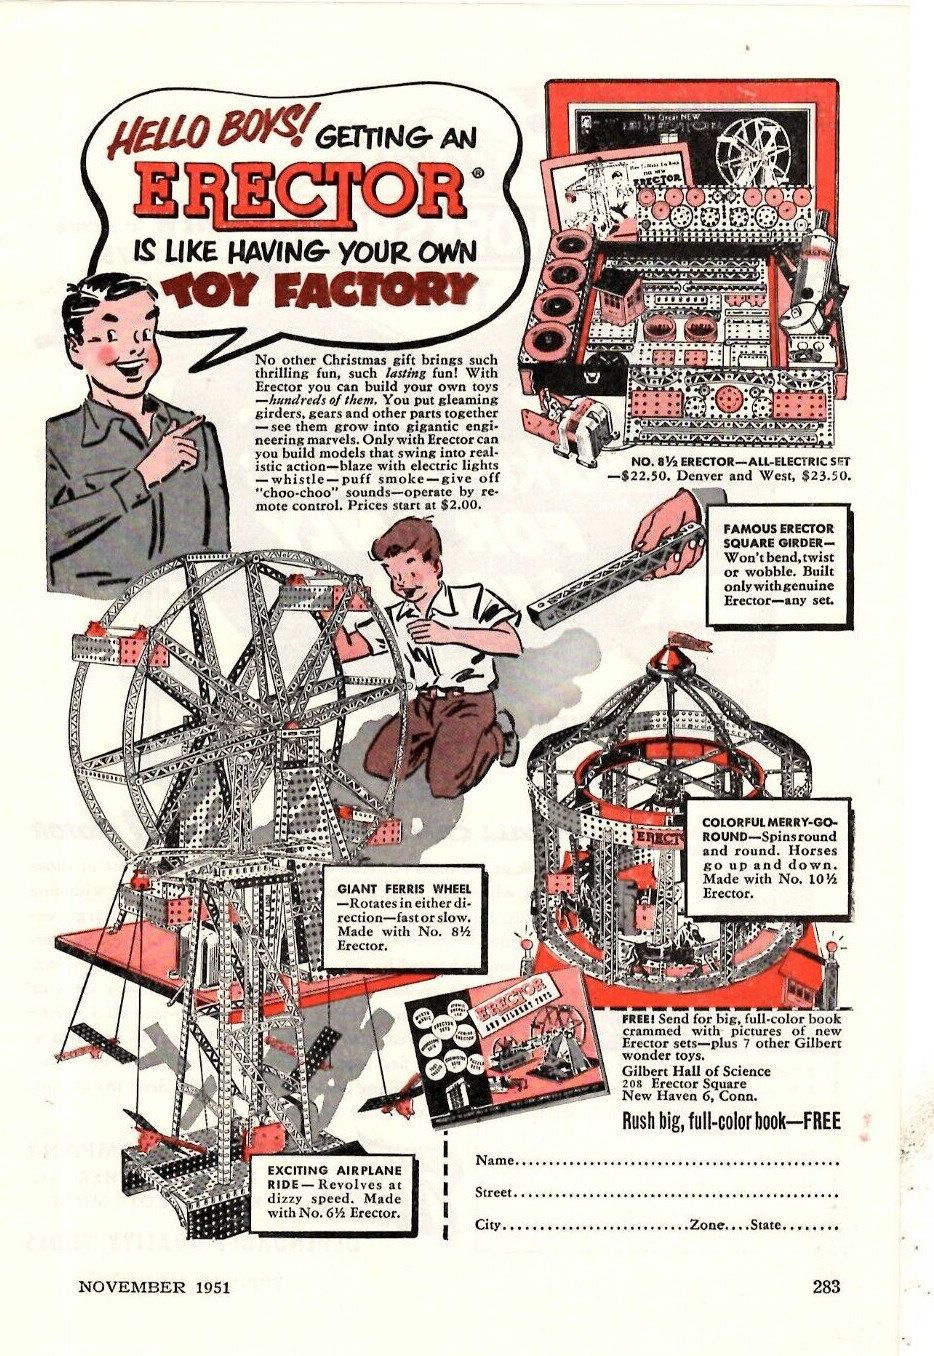 1951 Print Ad Gilbert Hall of Science Hello Boys Getting an Erector Toy Factory